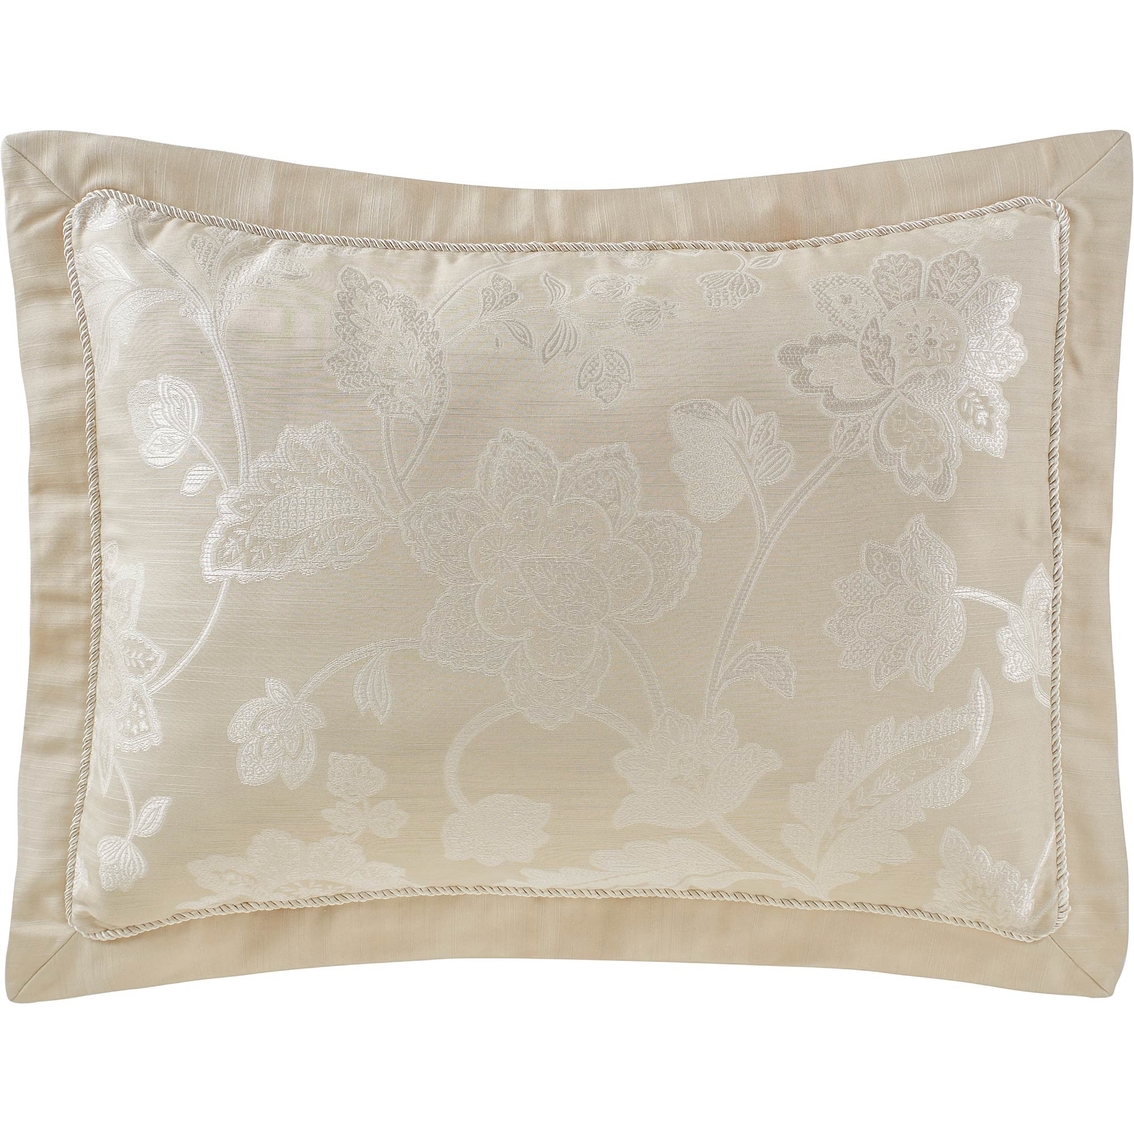 Marquis by Waterford Emilia Comforter Set - Image 3 of 3